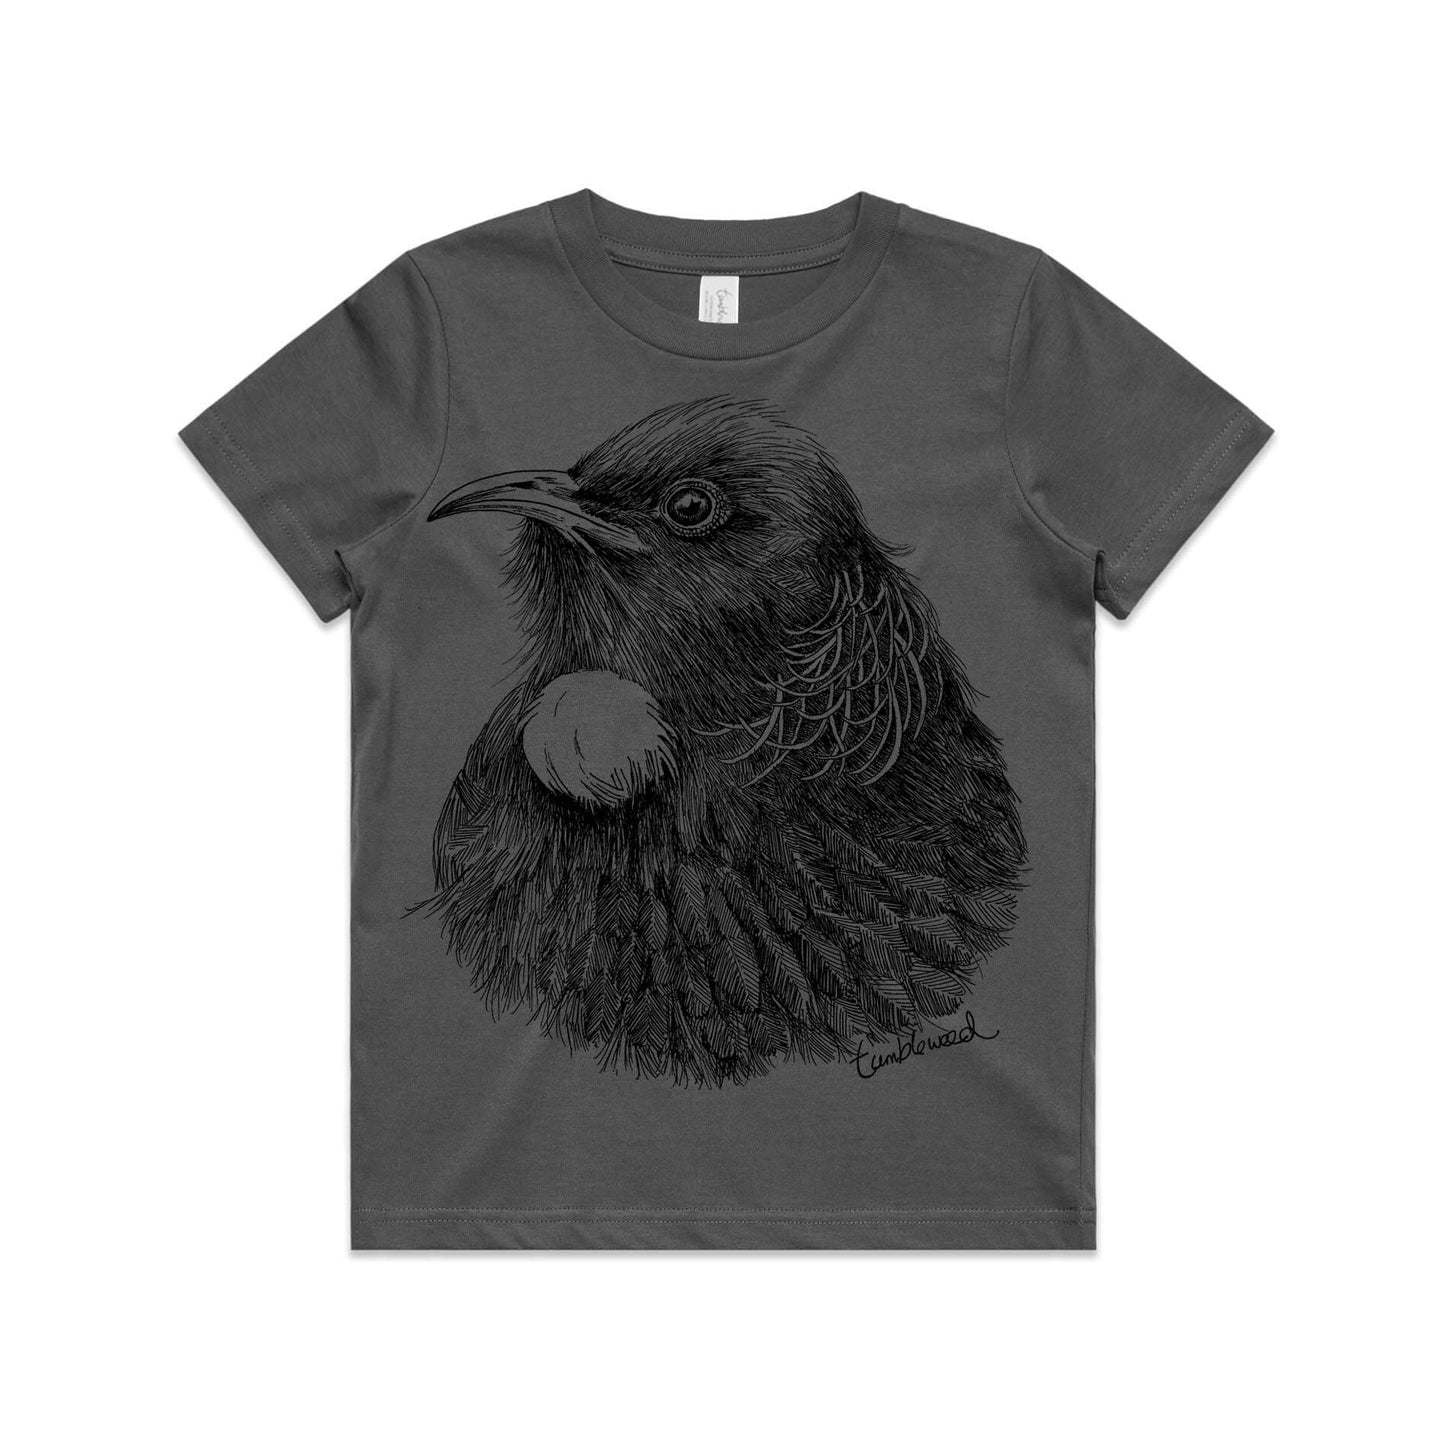 Charcoal, cotton kids' t-shirt with screen printed tui design.